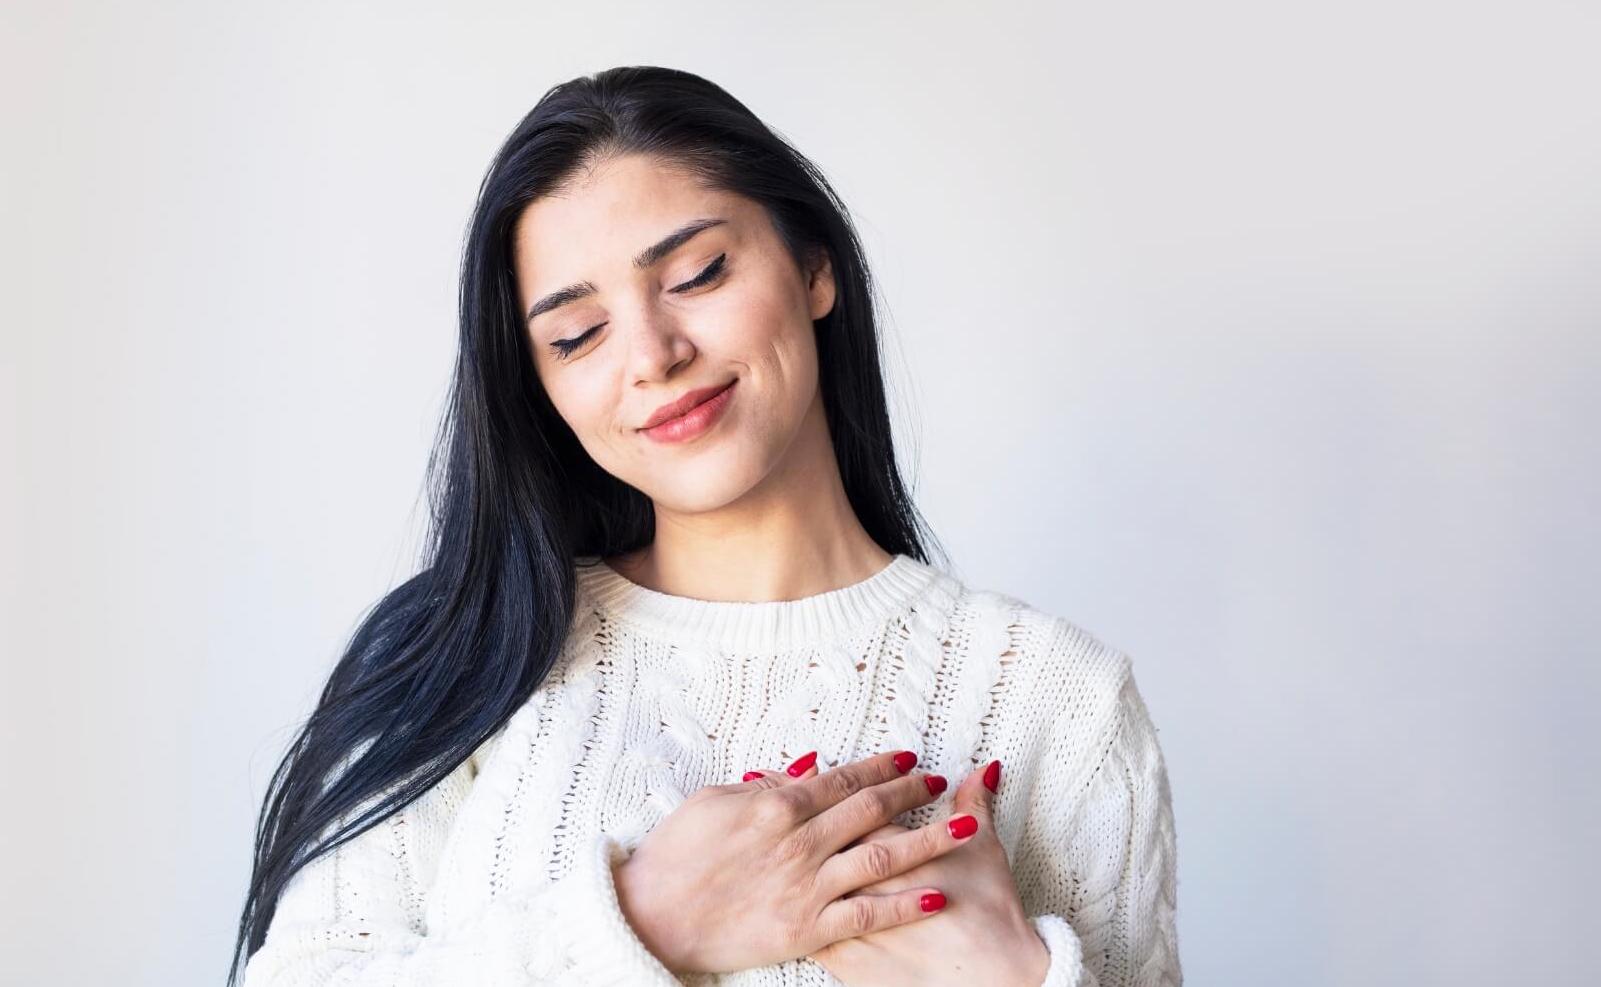 A woman smiling with her hands on her chest, embodying the concept of self-compassion.